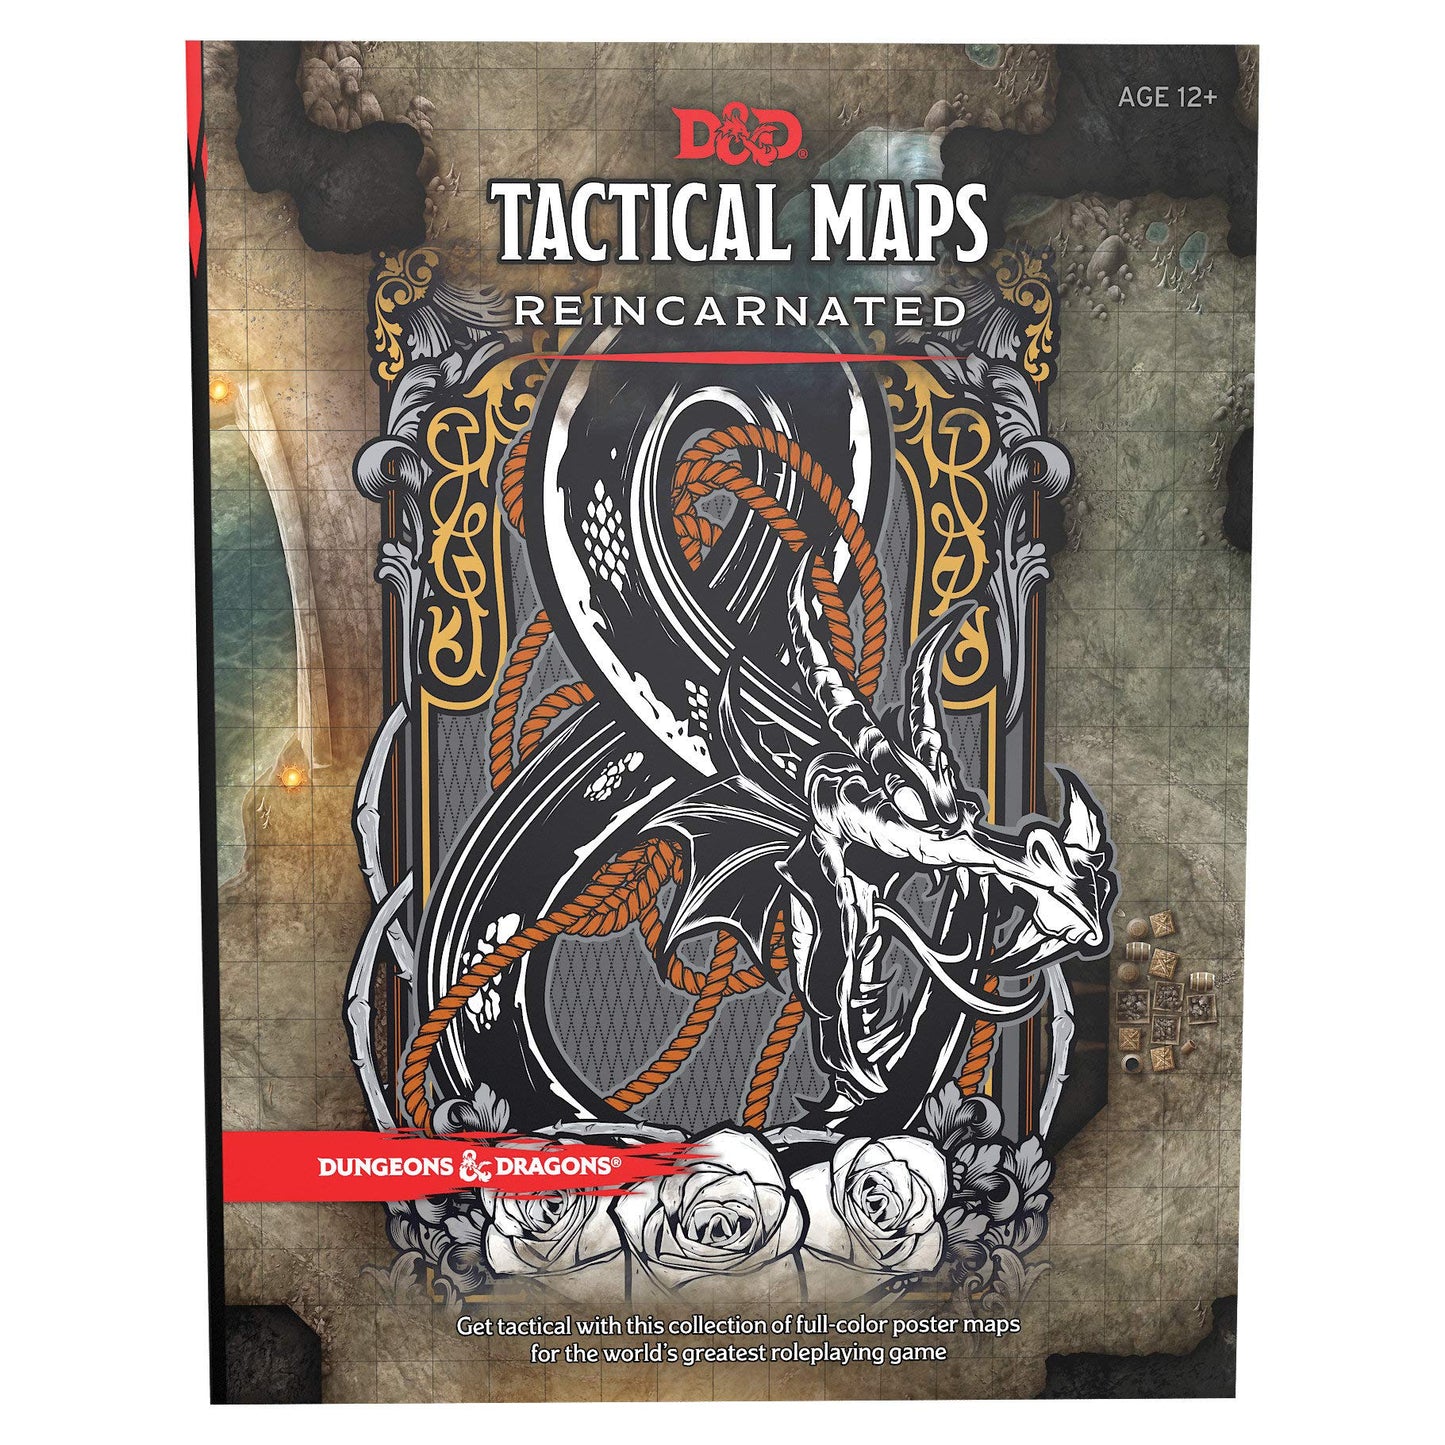 Tactical Maps: Reincarnated